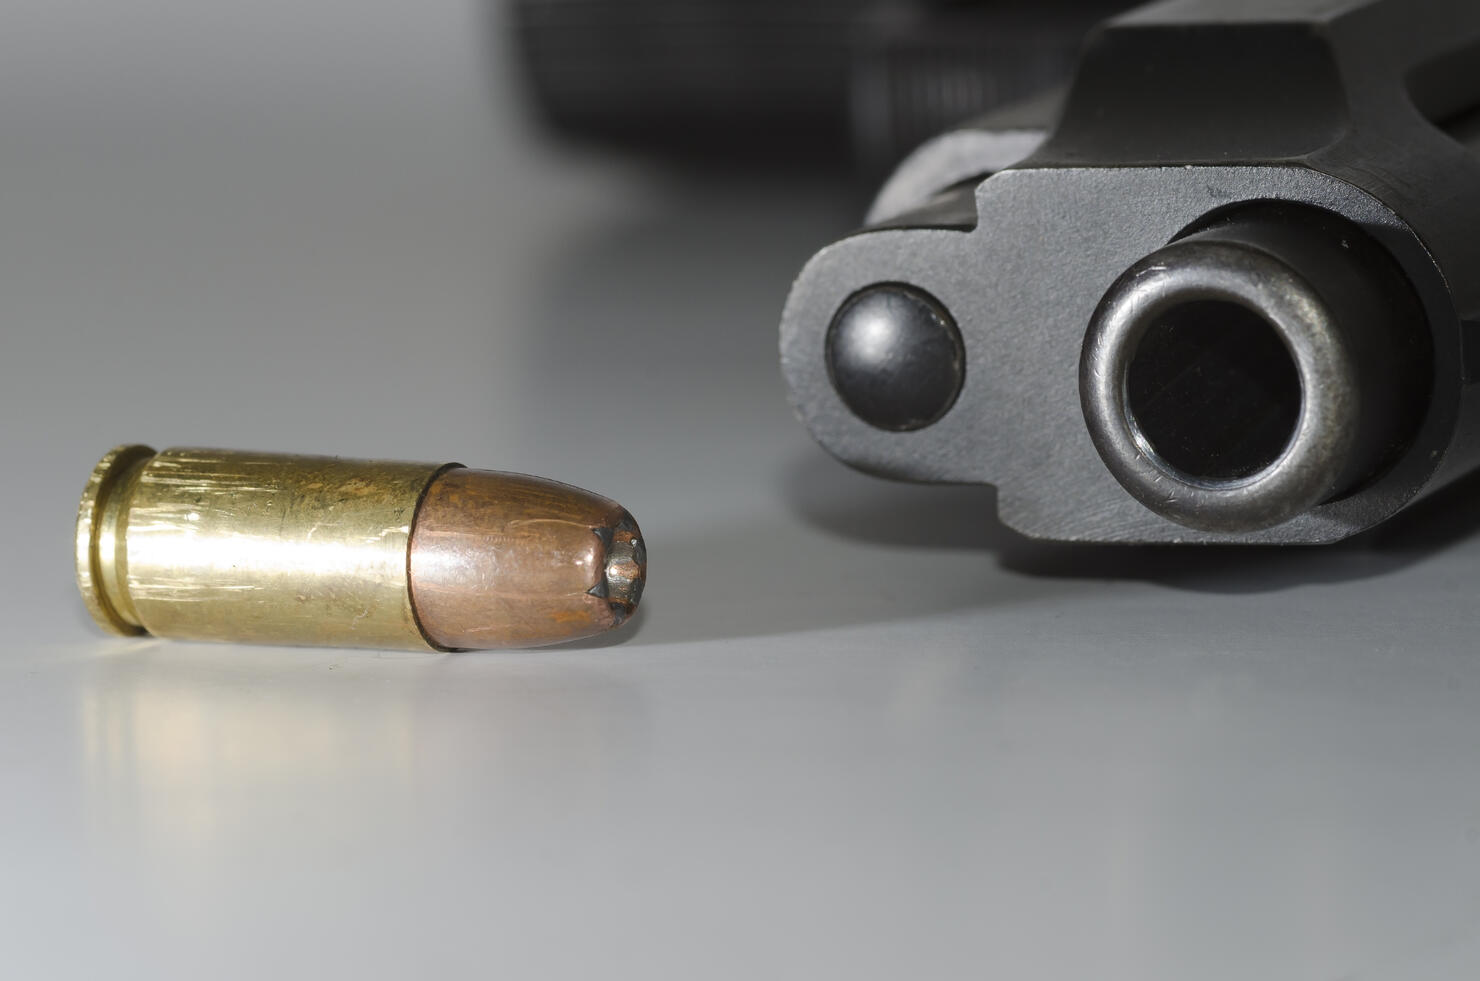 Close-Up Of Gun And Bullet On Table